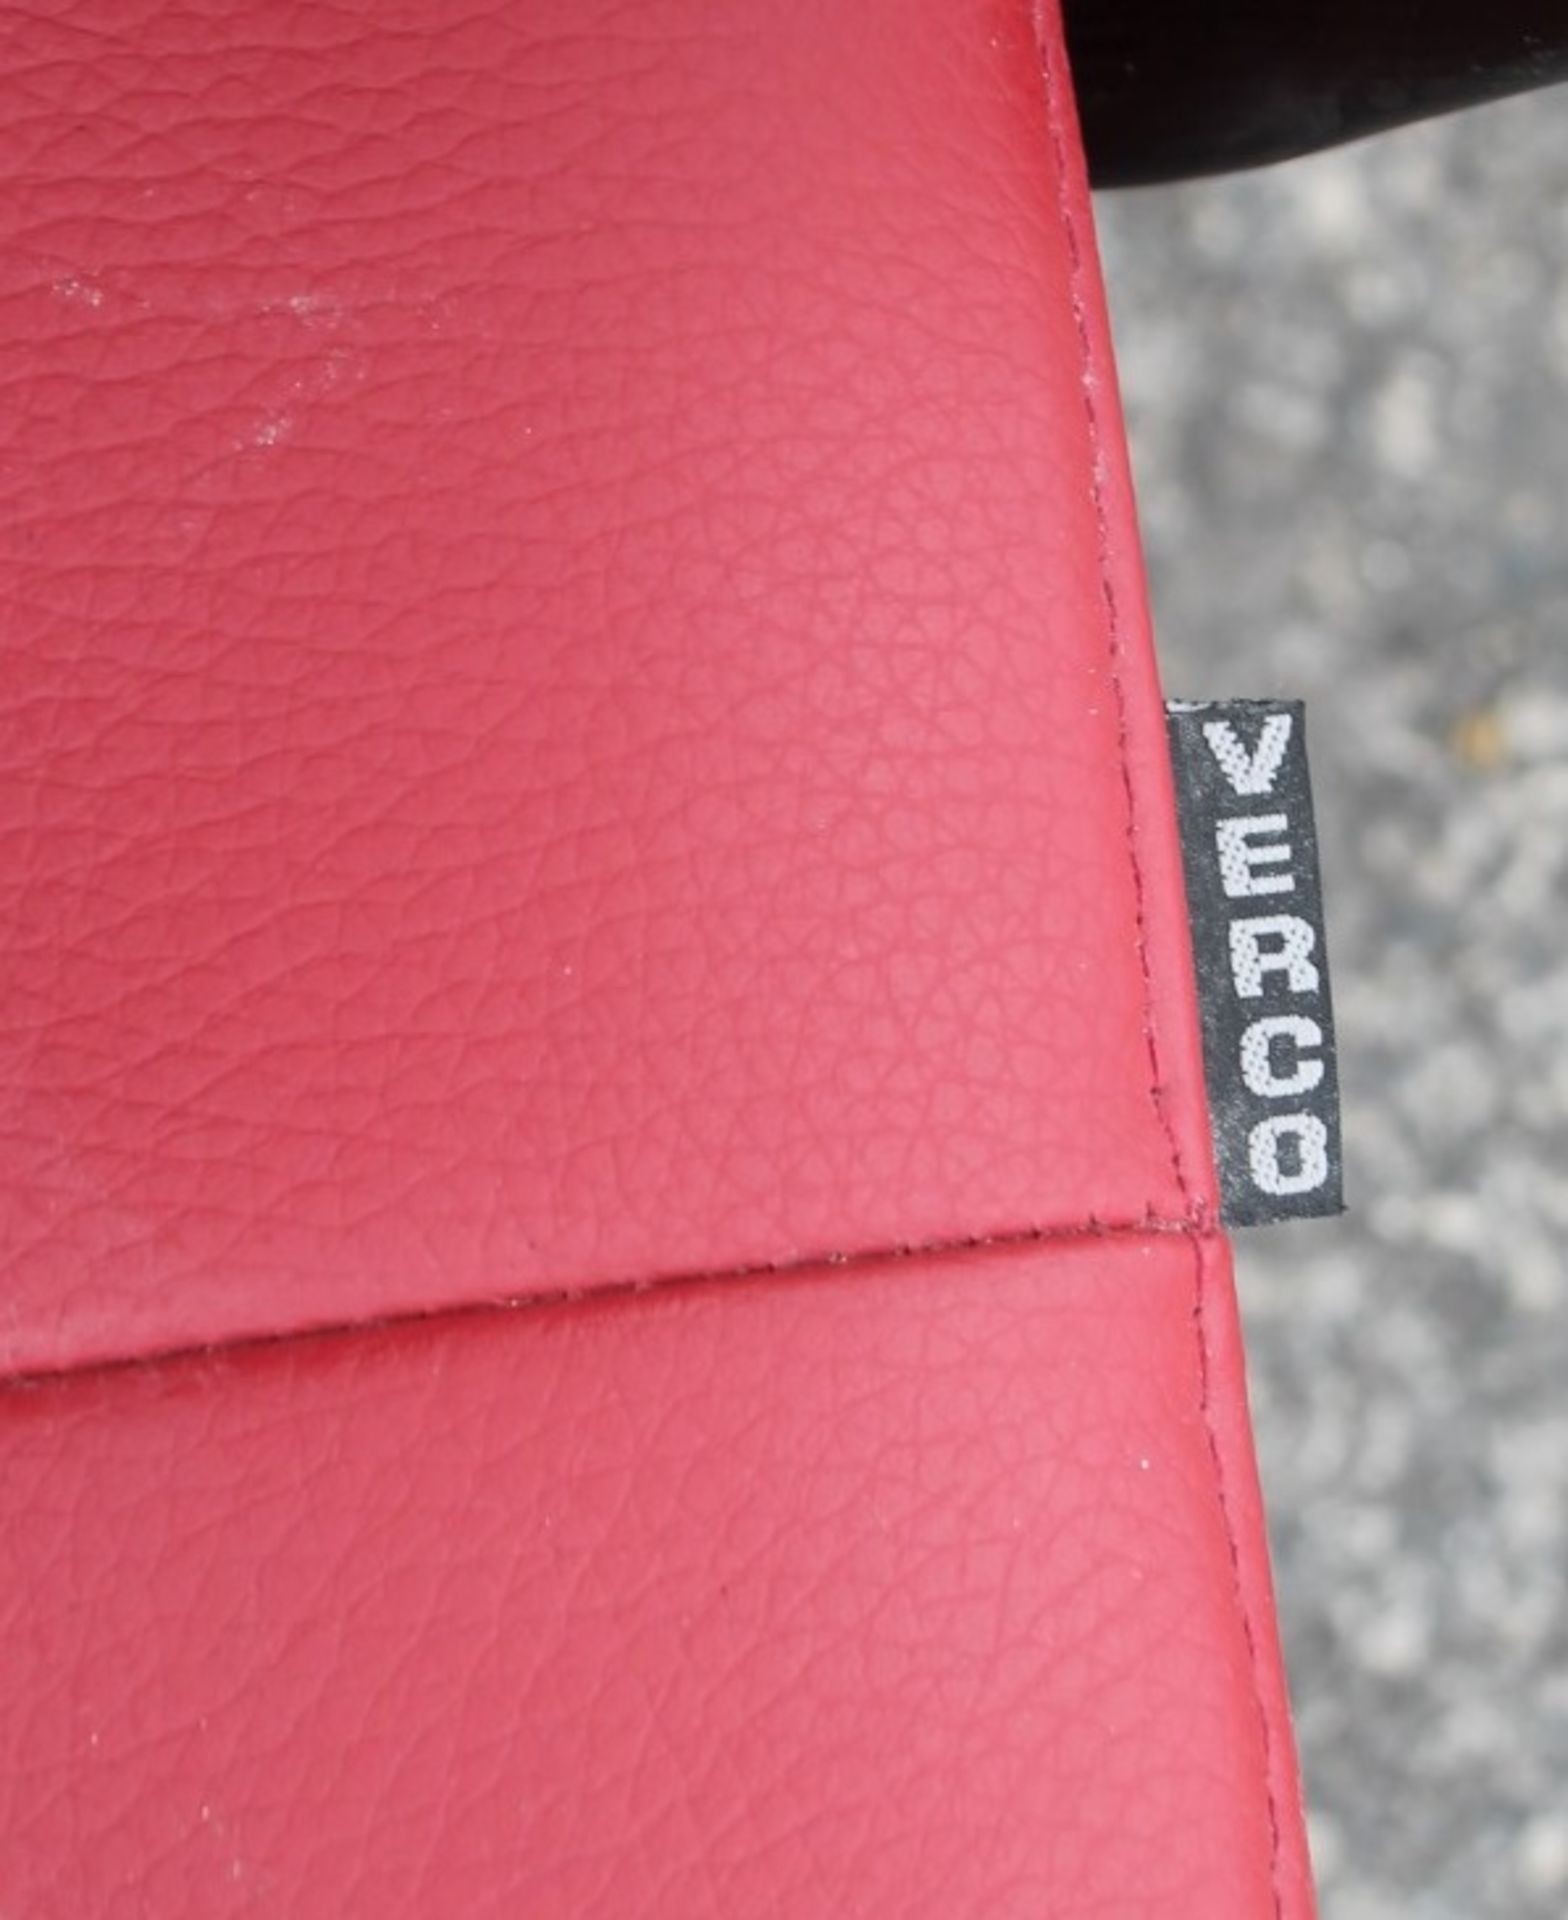 1 x VERCO Branded Gas Lift Swivel Chair Upholstered In A Red Faux Leather - Removed From An - Image 5 of 5